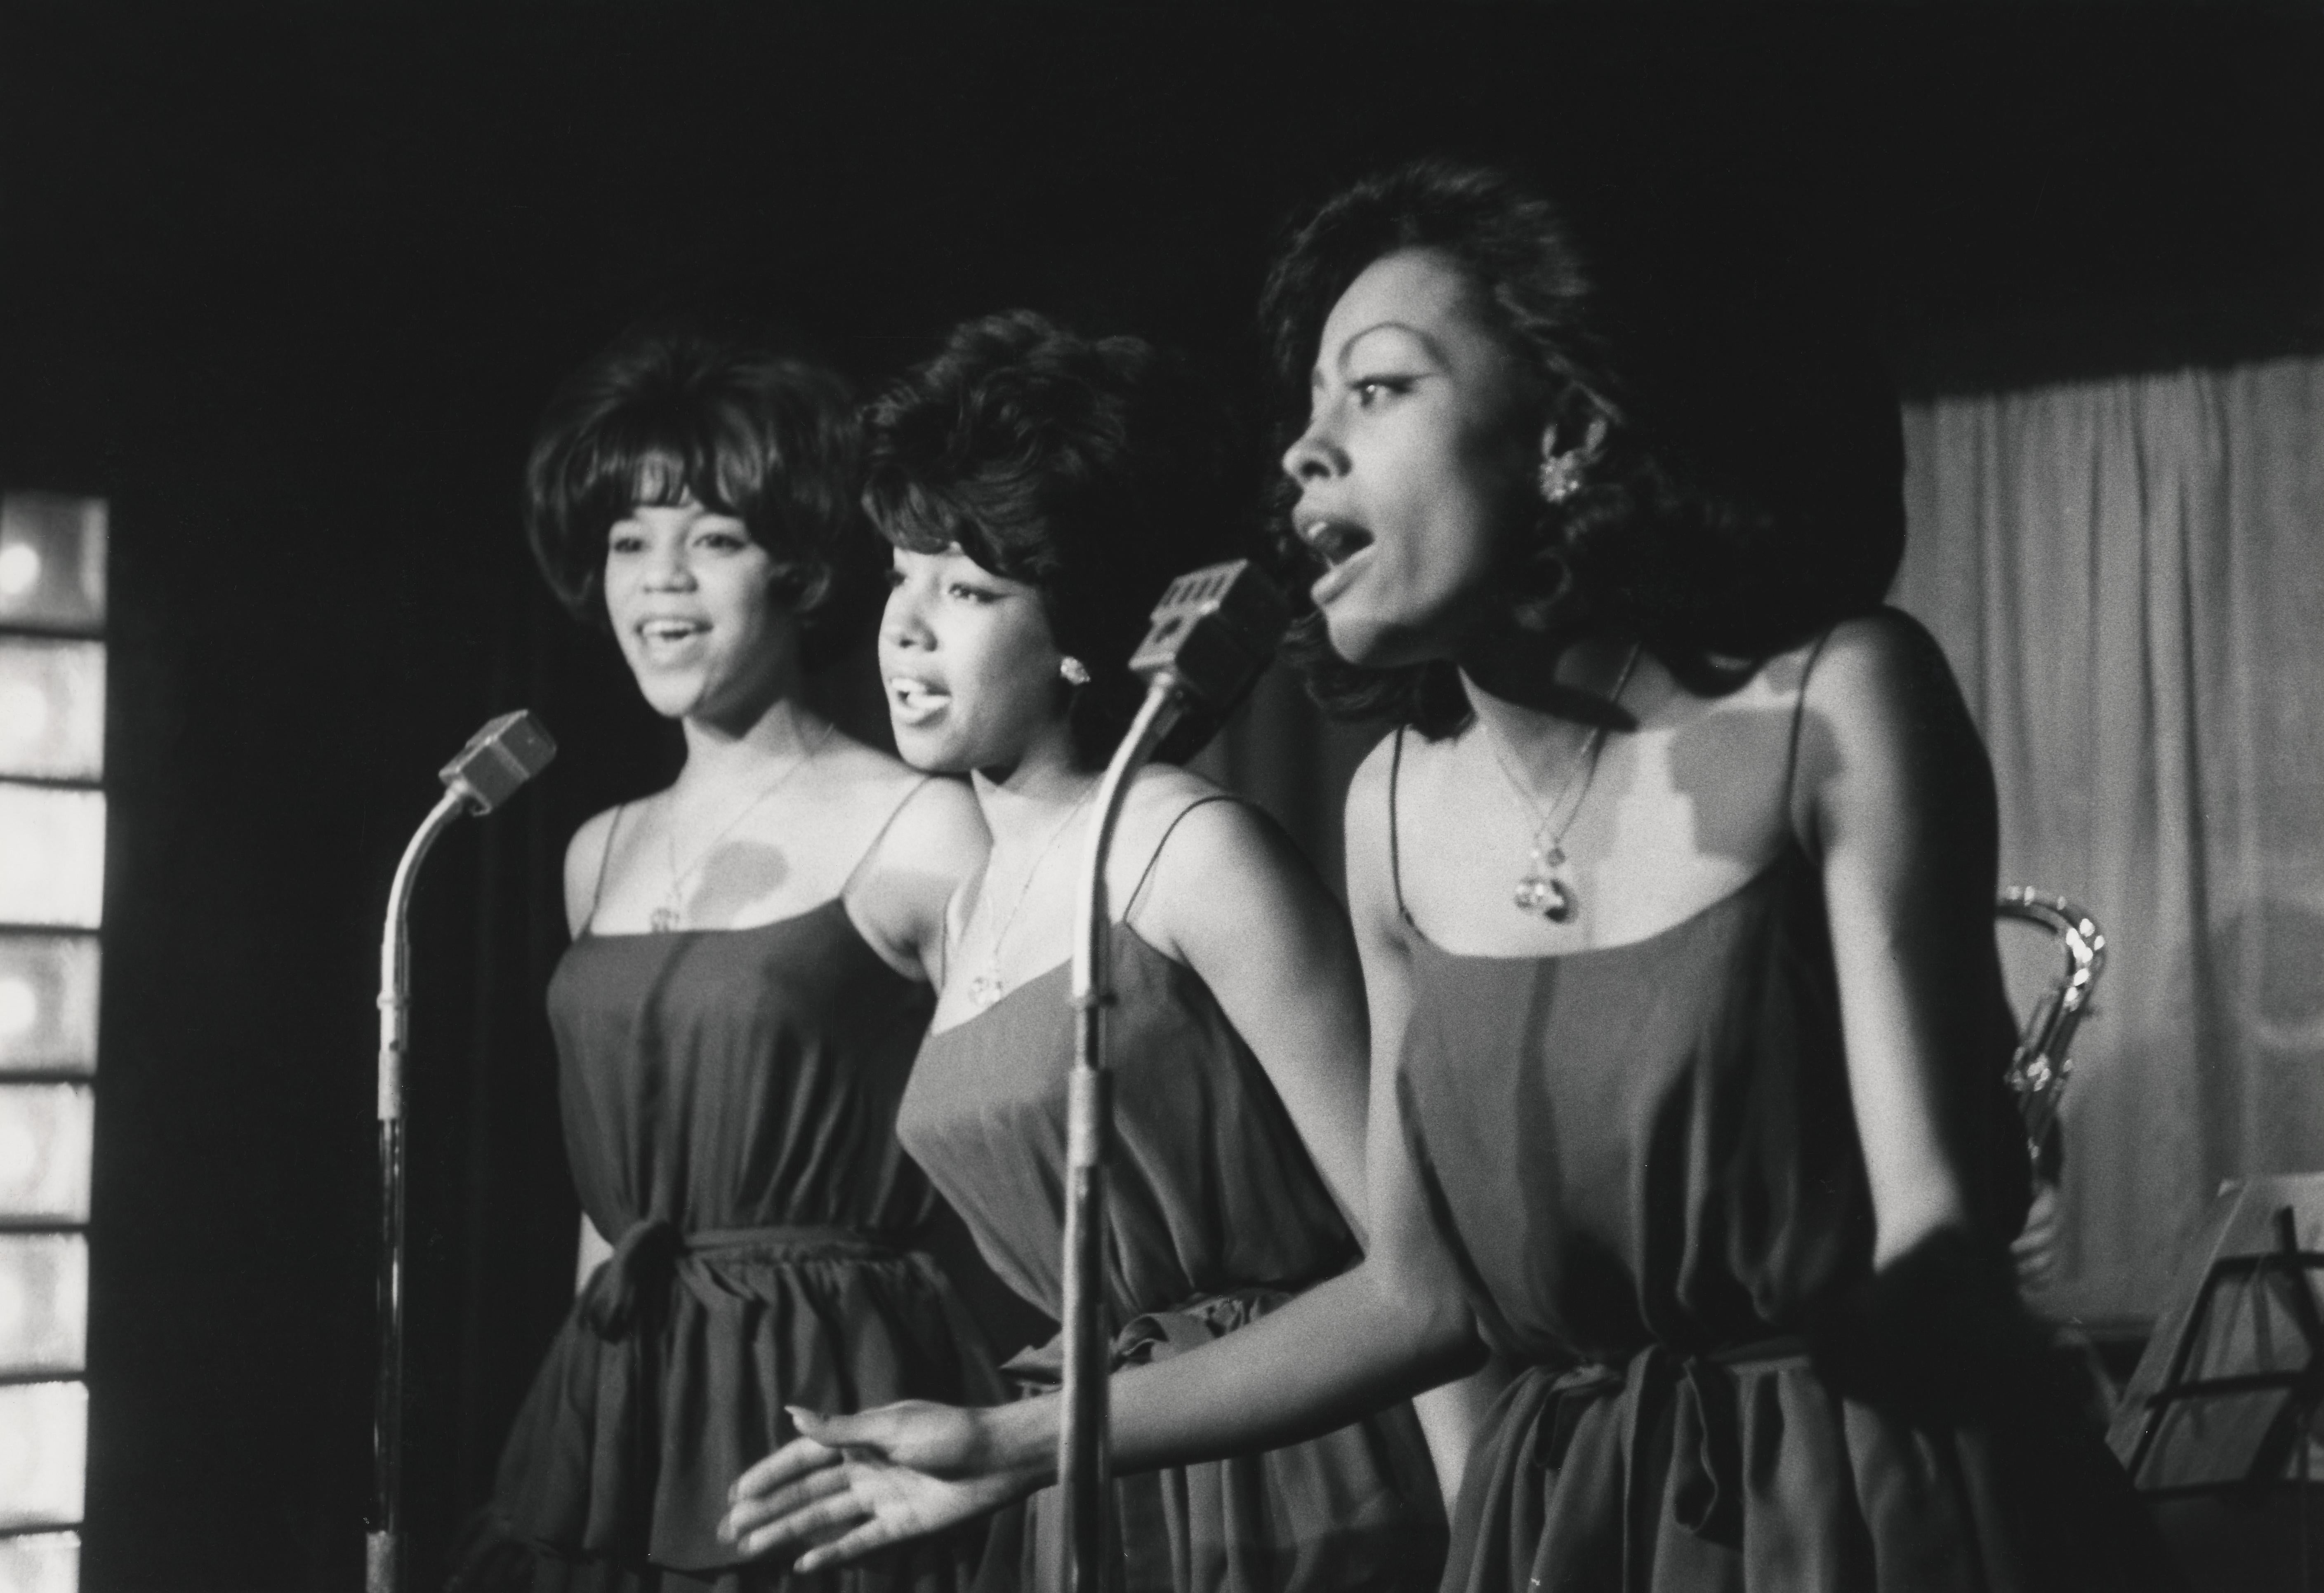 Unknown Black and White Photograph - The Supremes Performing Globe Photos Fine Art Print